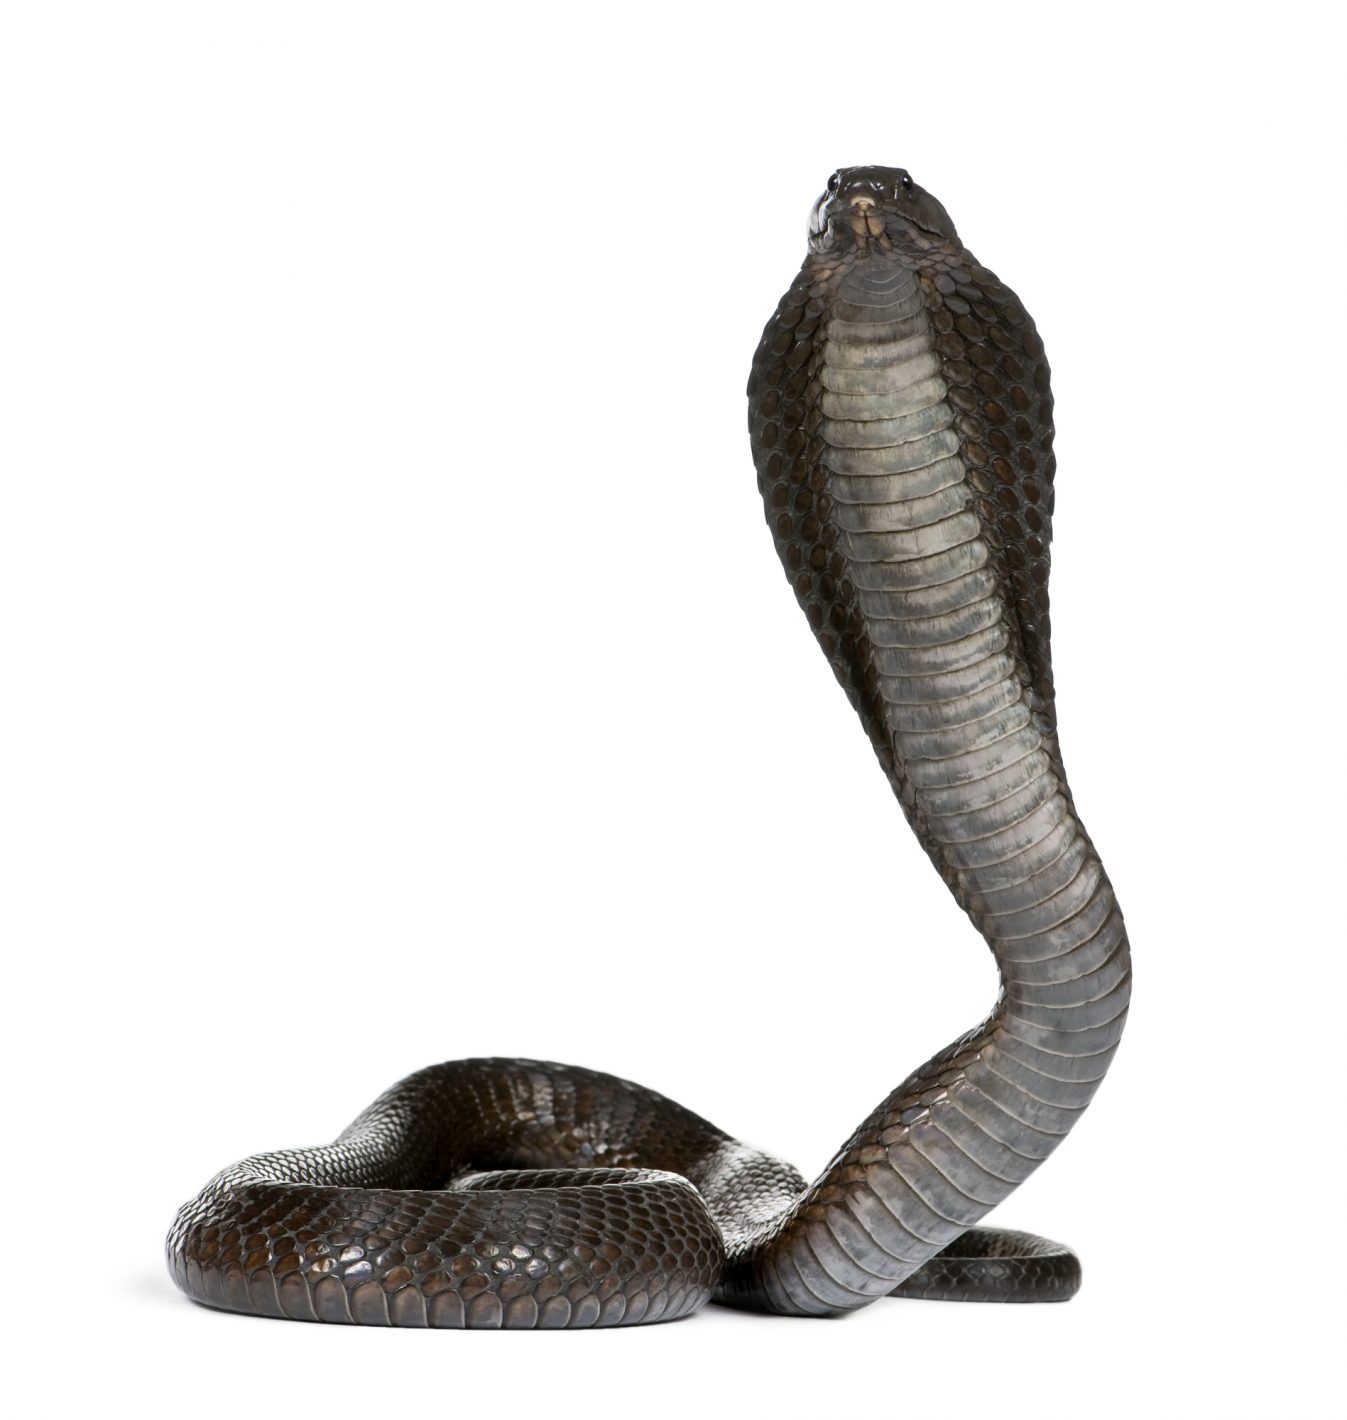 A snake shifter with two penises